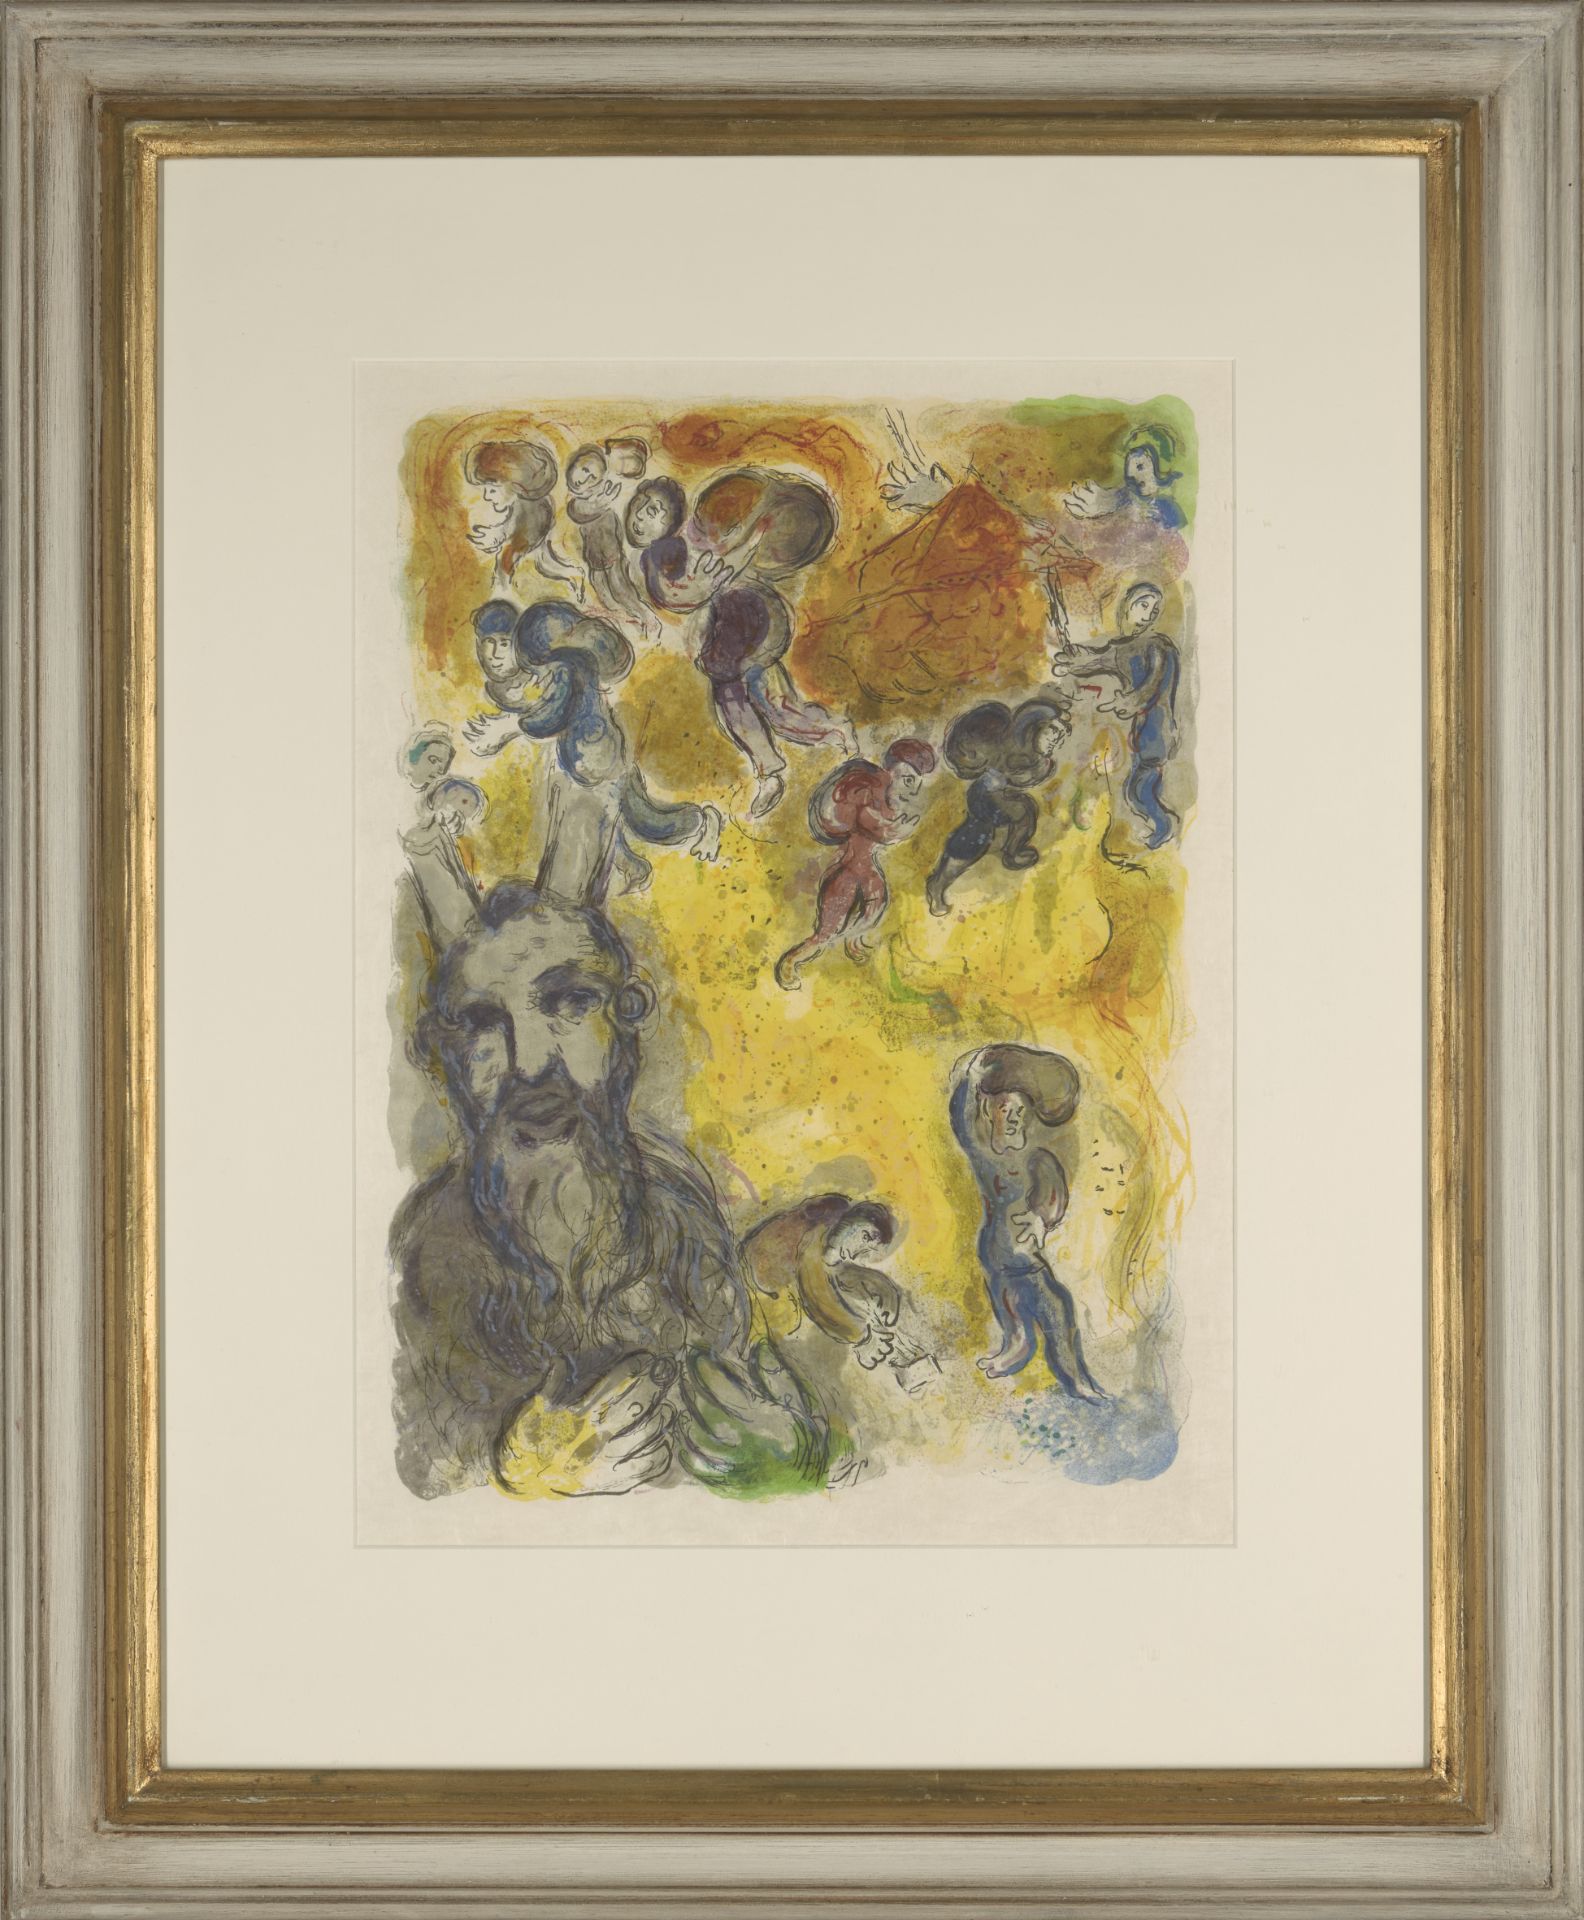 Marc Chagall, French/Russian 1887-1985, From The Story of the Exodus' Suite, 1966; lithograph i... - Image 2 of 4